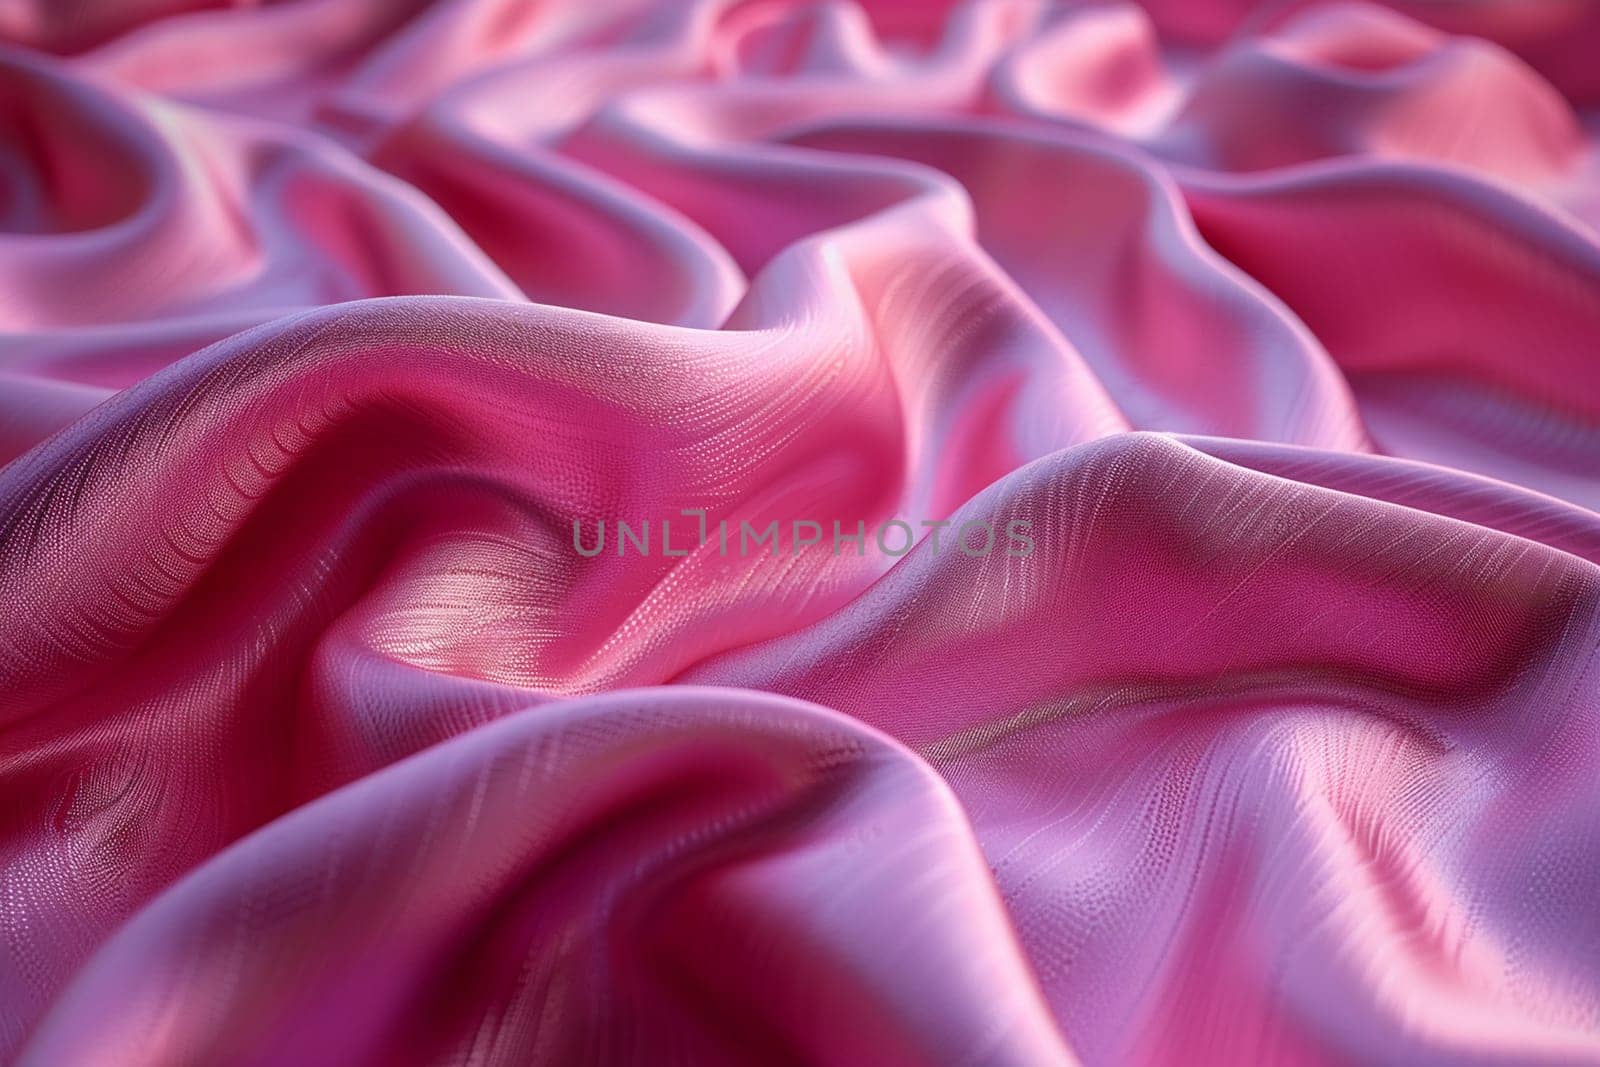 Close-up of elegant fuchsia-colored silk fabric creating an abstract 3D textured background with a luxurious feel.